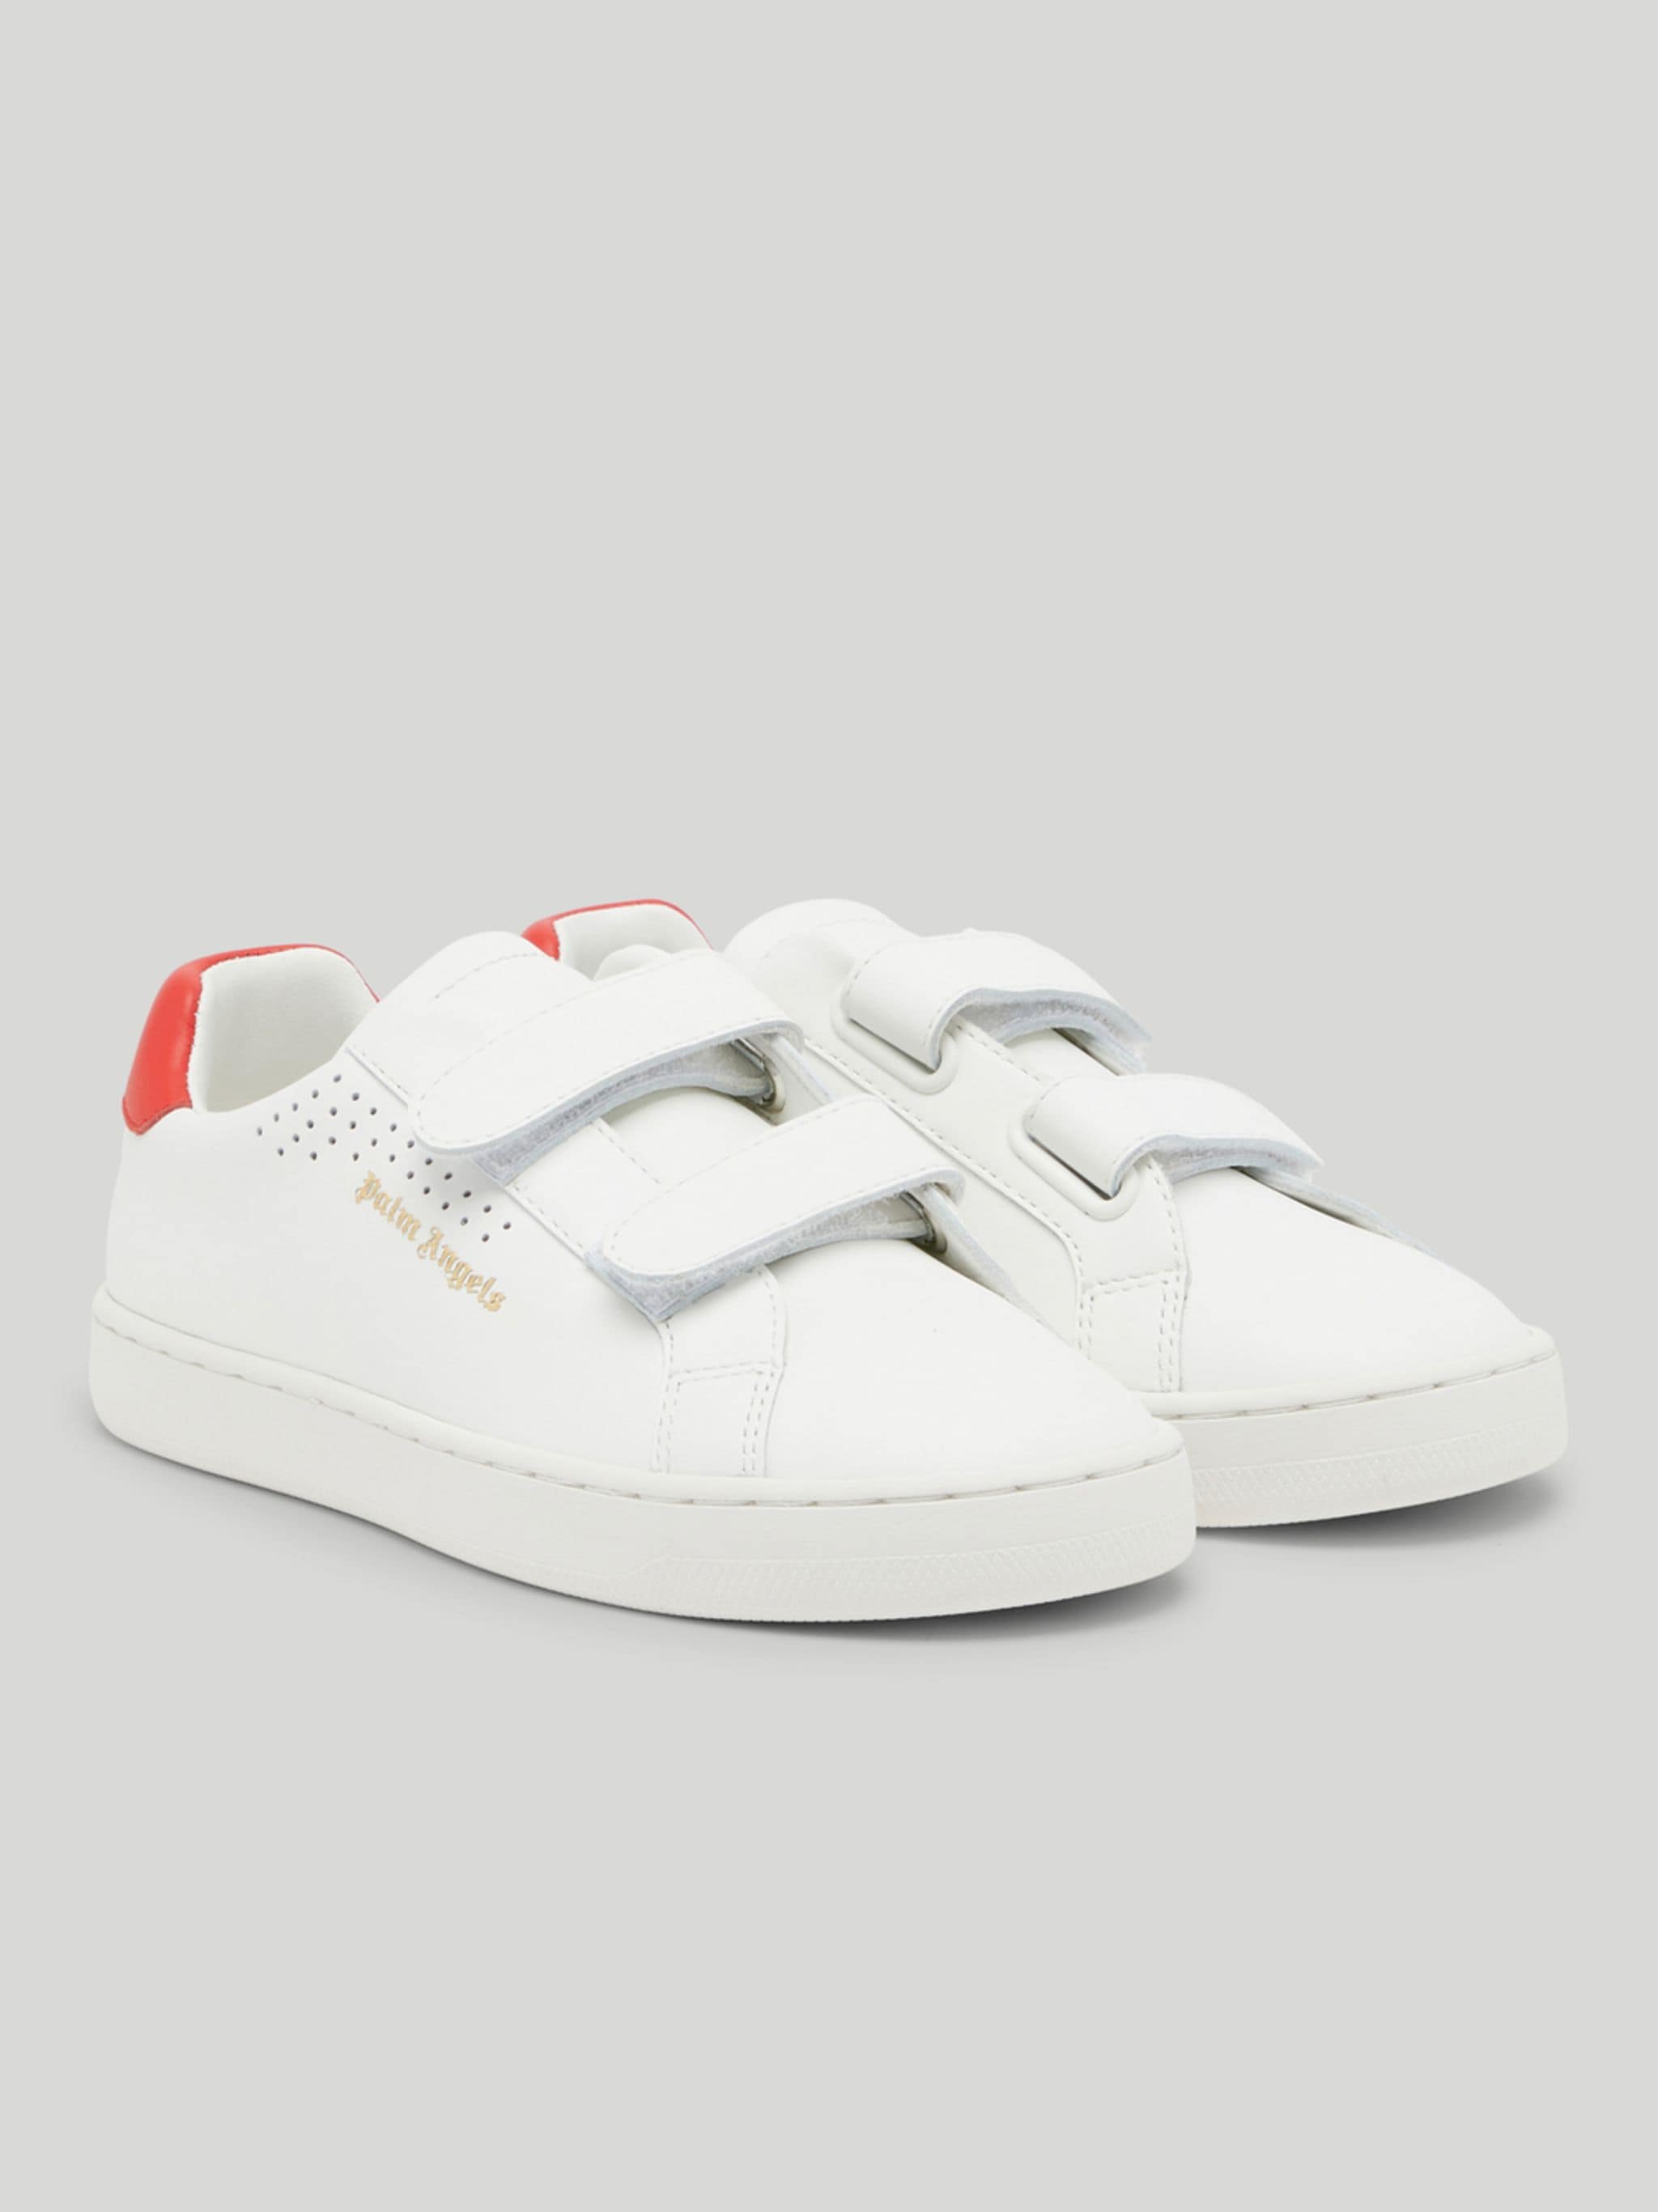 SNEAKERS PALM ONE ROSSE CON STRAP